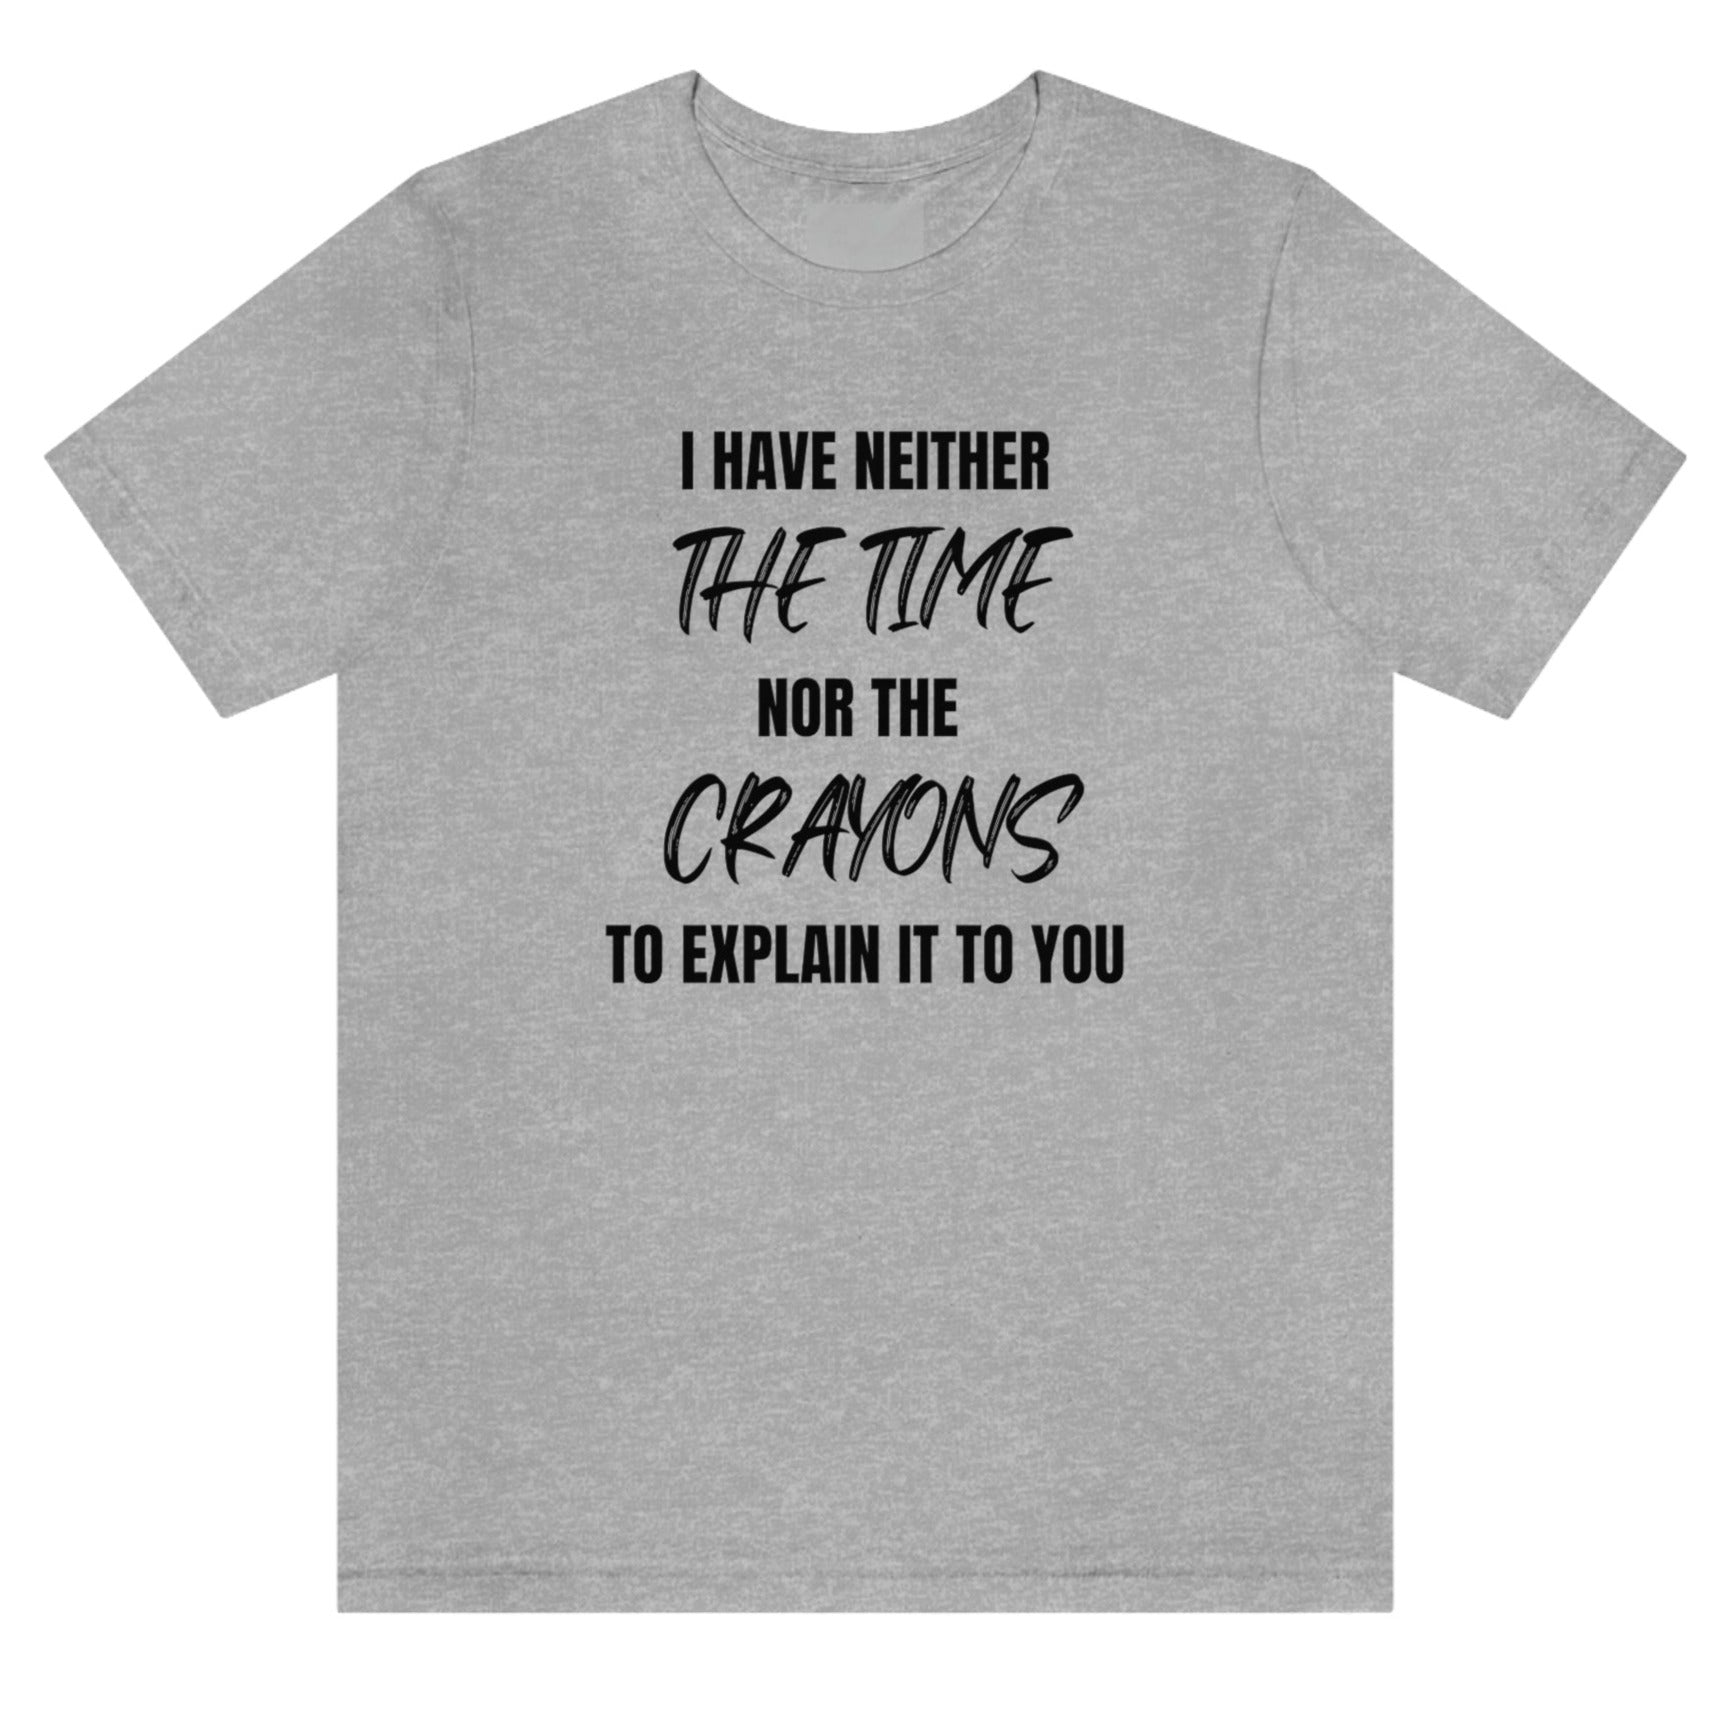 i-have-neither-the-time-nor-the-crayons-to-explain-it-to-you-athletic-heather-t-shirt-unisex